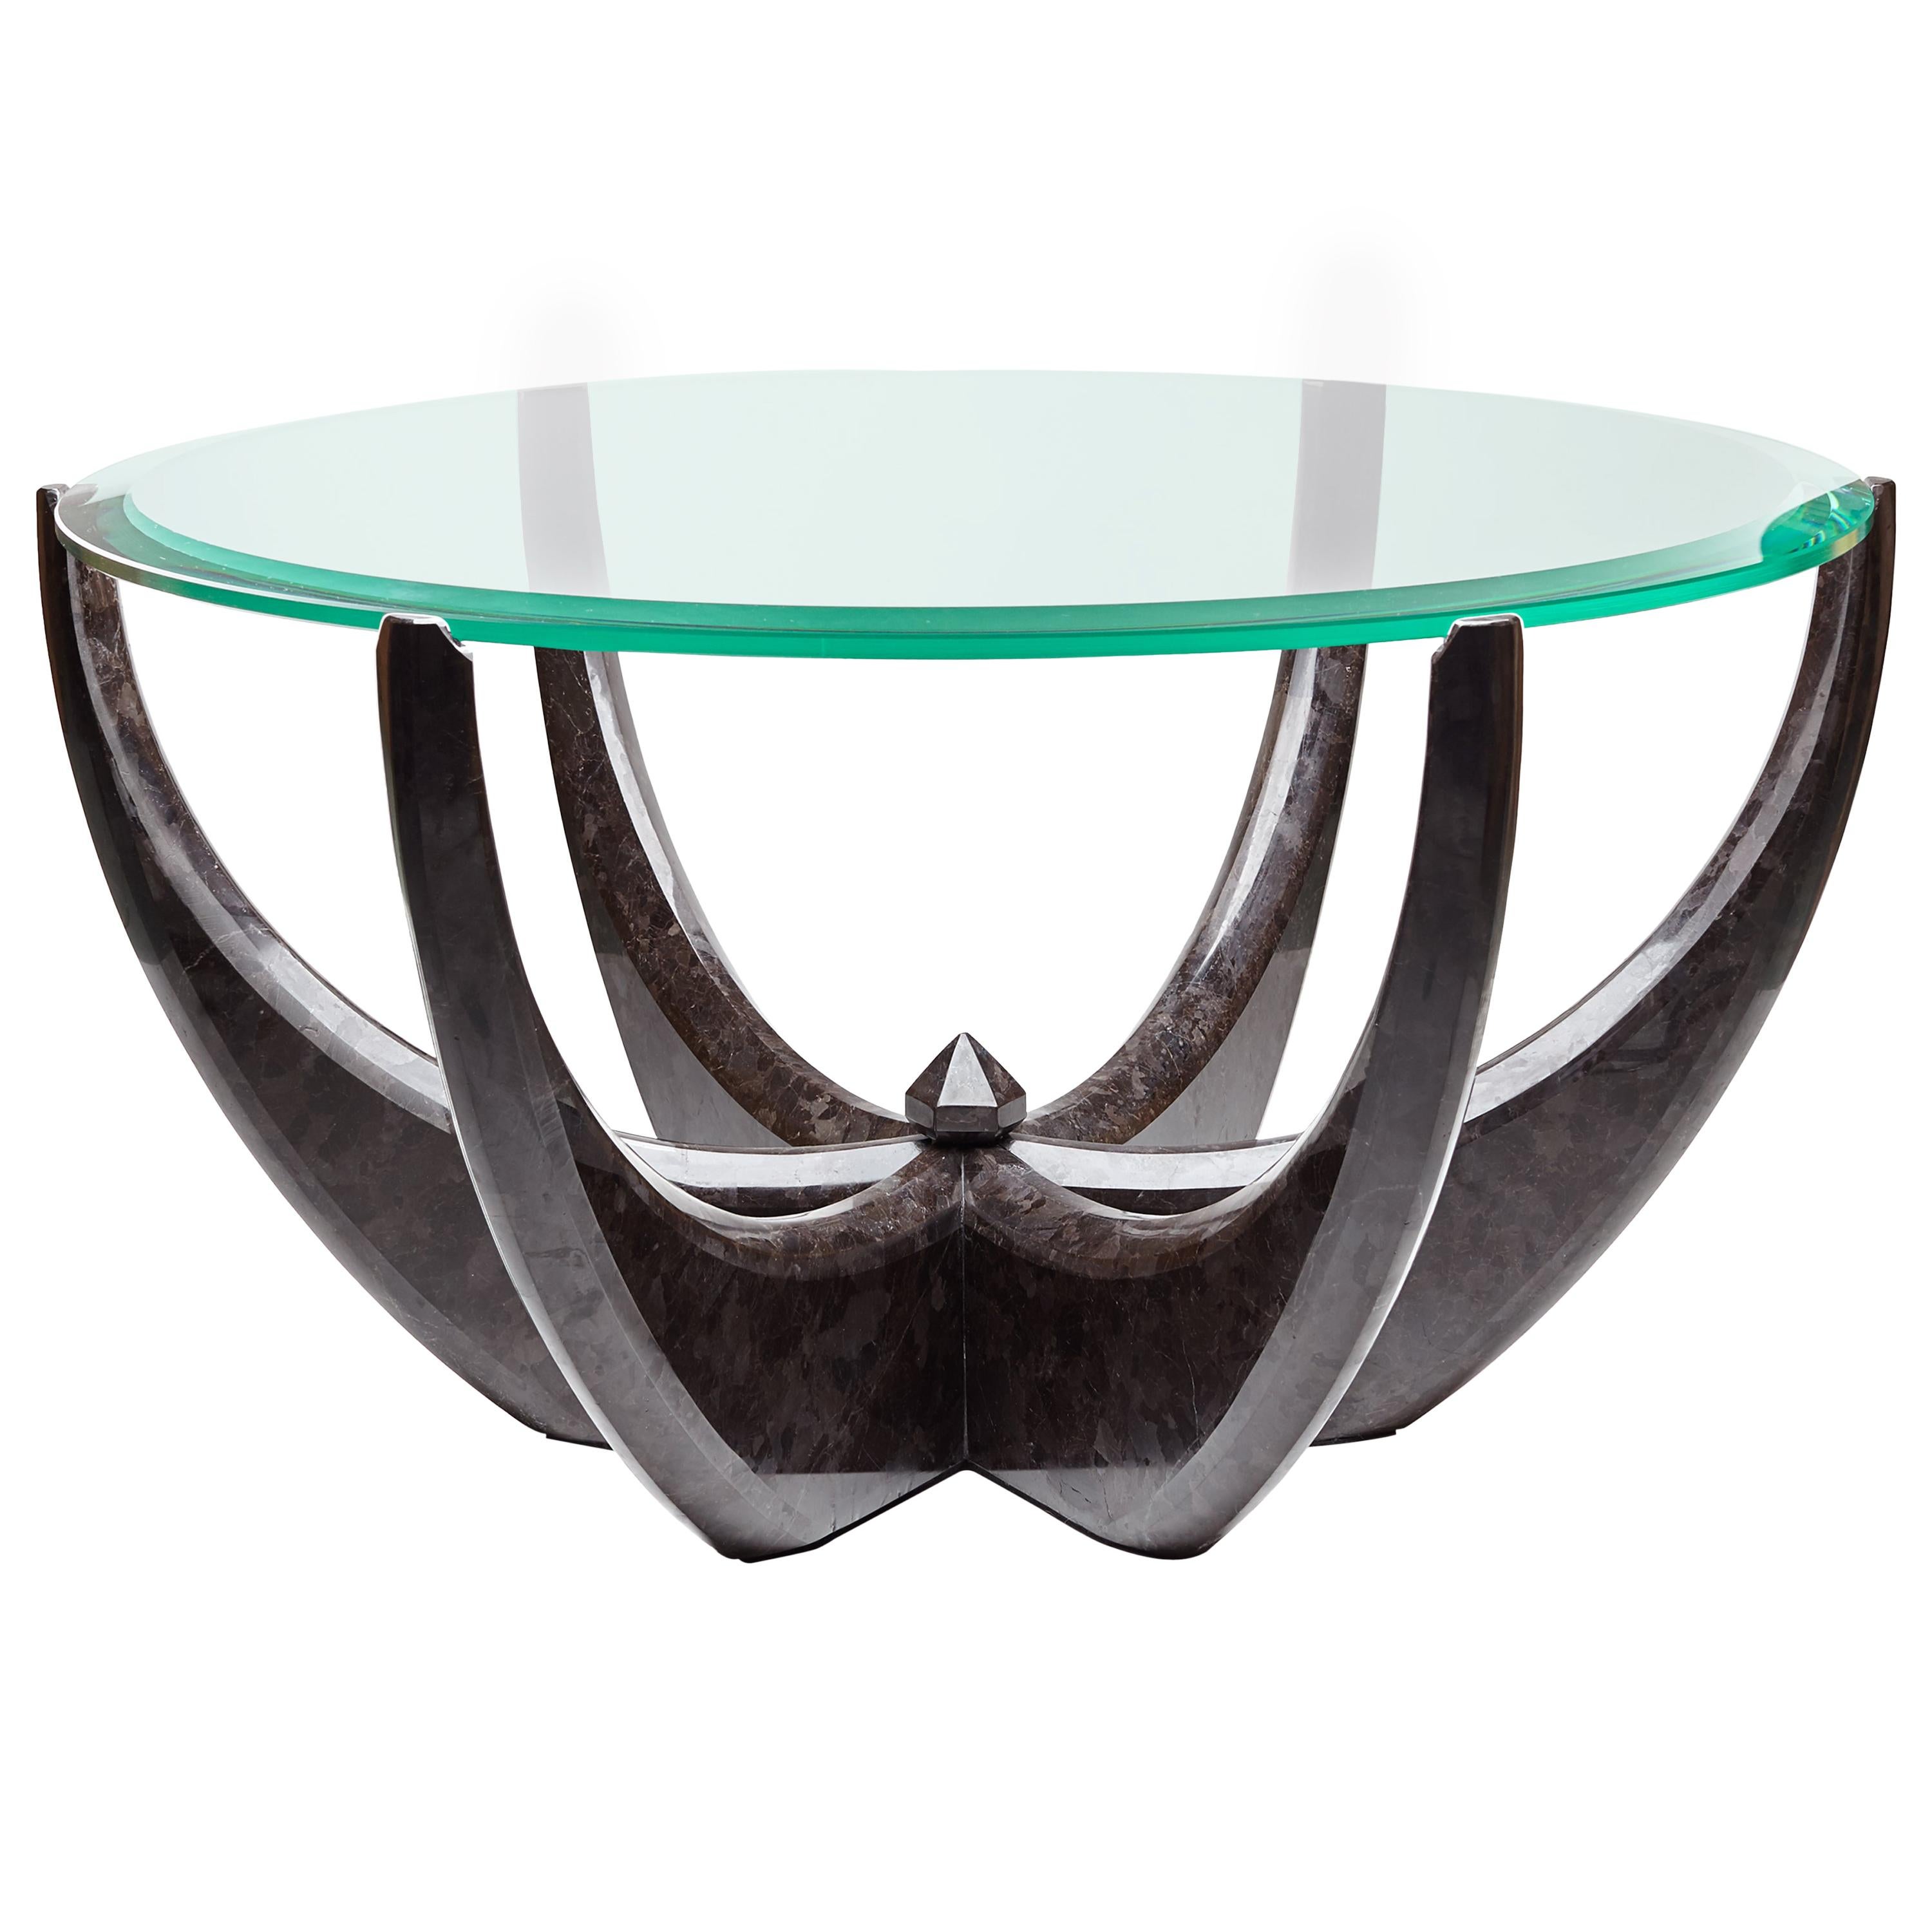 "The Diamond Ring" Center Table ft. Antigue Brown Granite and Glass For Sale